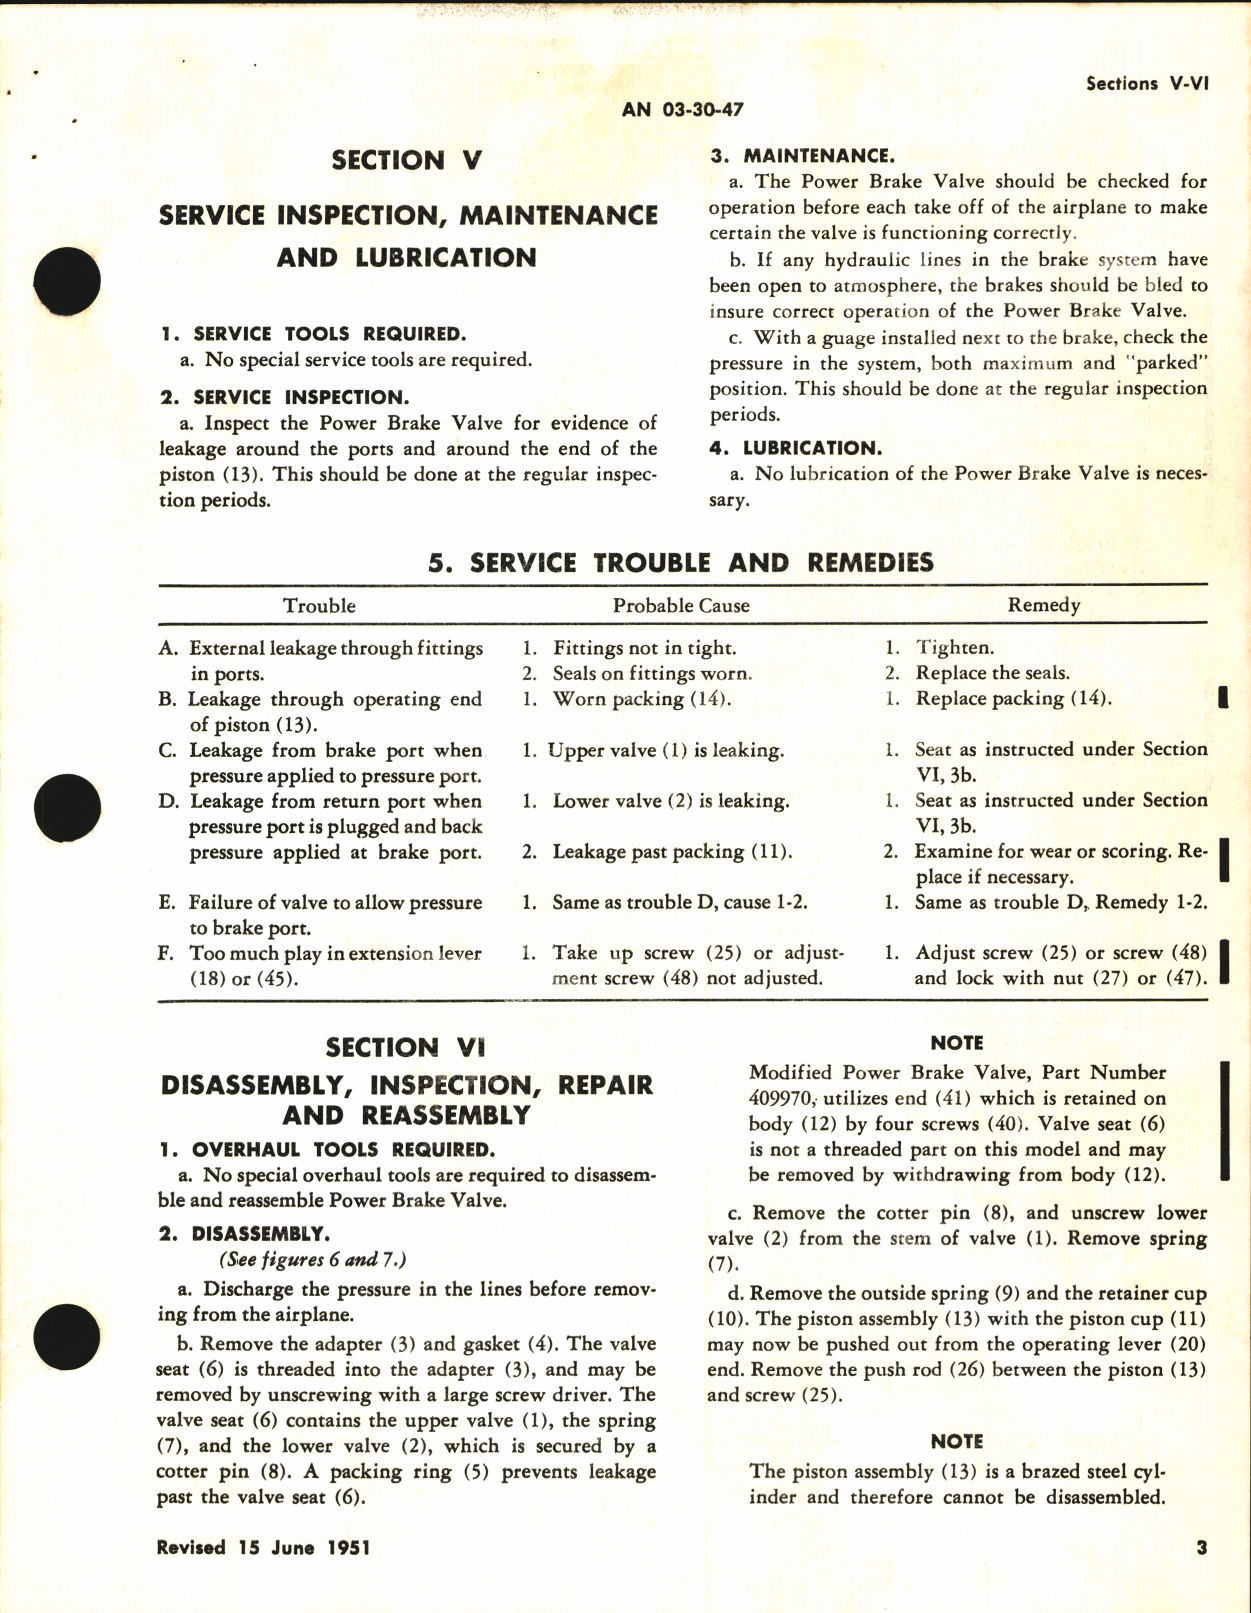 Sample page 7 from AirCorps Library document: Operation, Service & Overhaul Instructions with Parts Catalog for Power Brake Valves